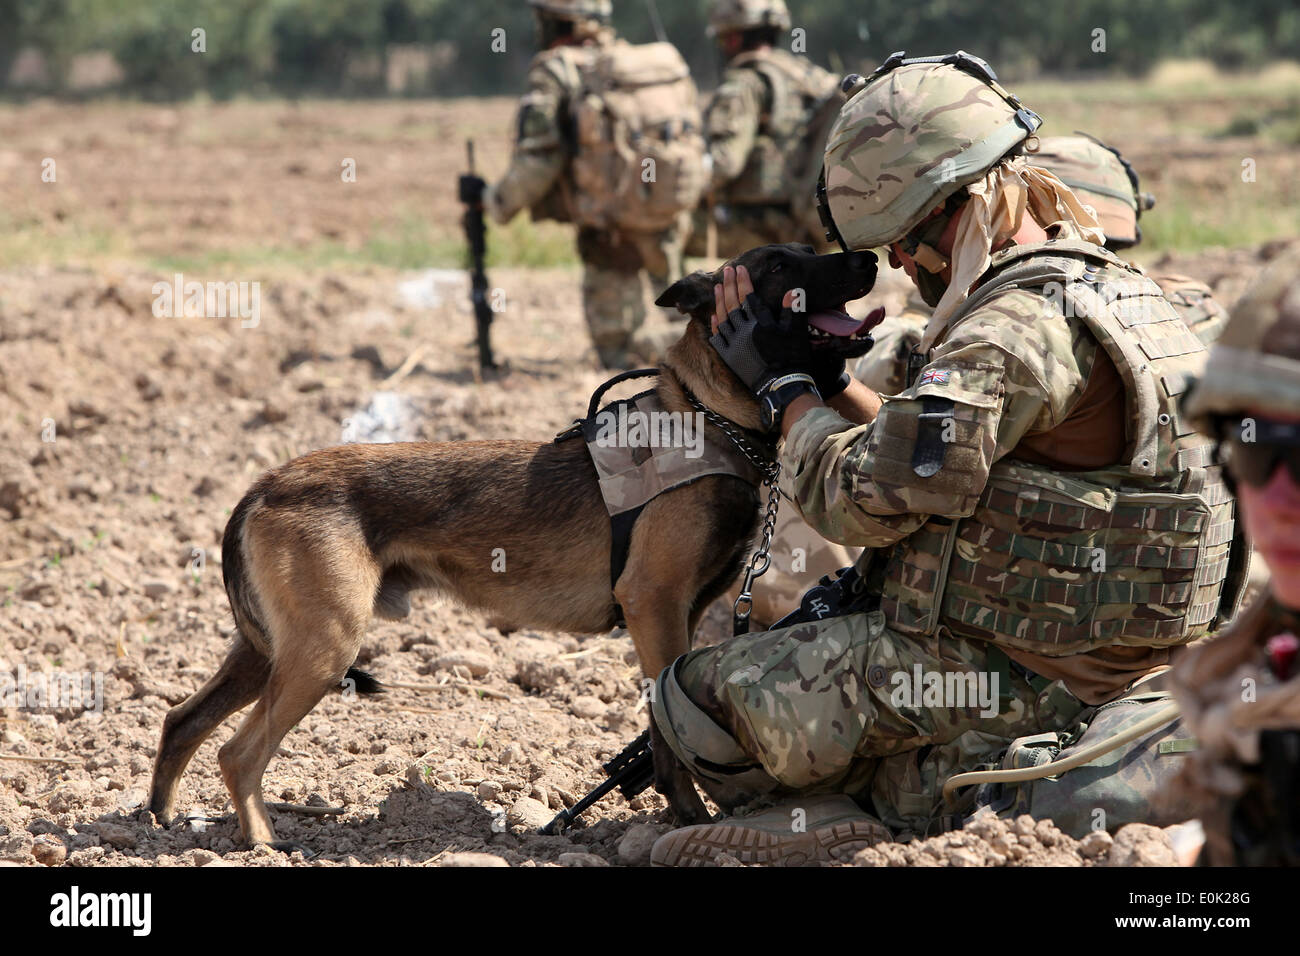 Lance Cpl. Tom Welstand, a native of Berystedmunds, England, and a military working dog handler with 103 Military Dog Squadron, Stock Photo